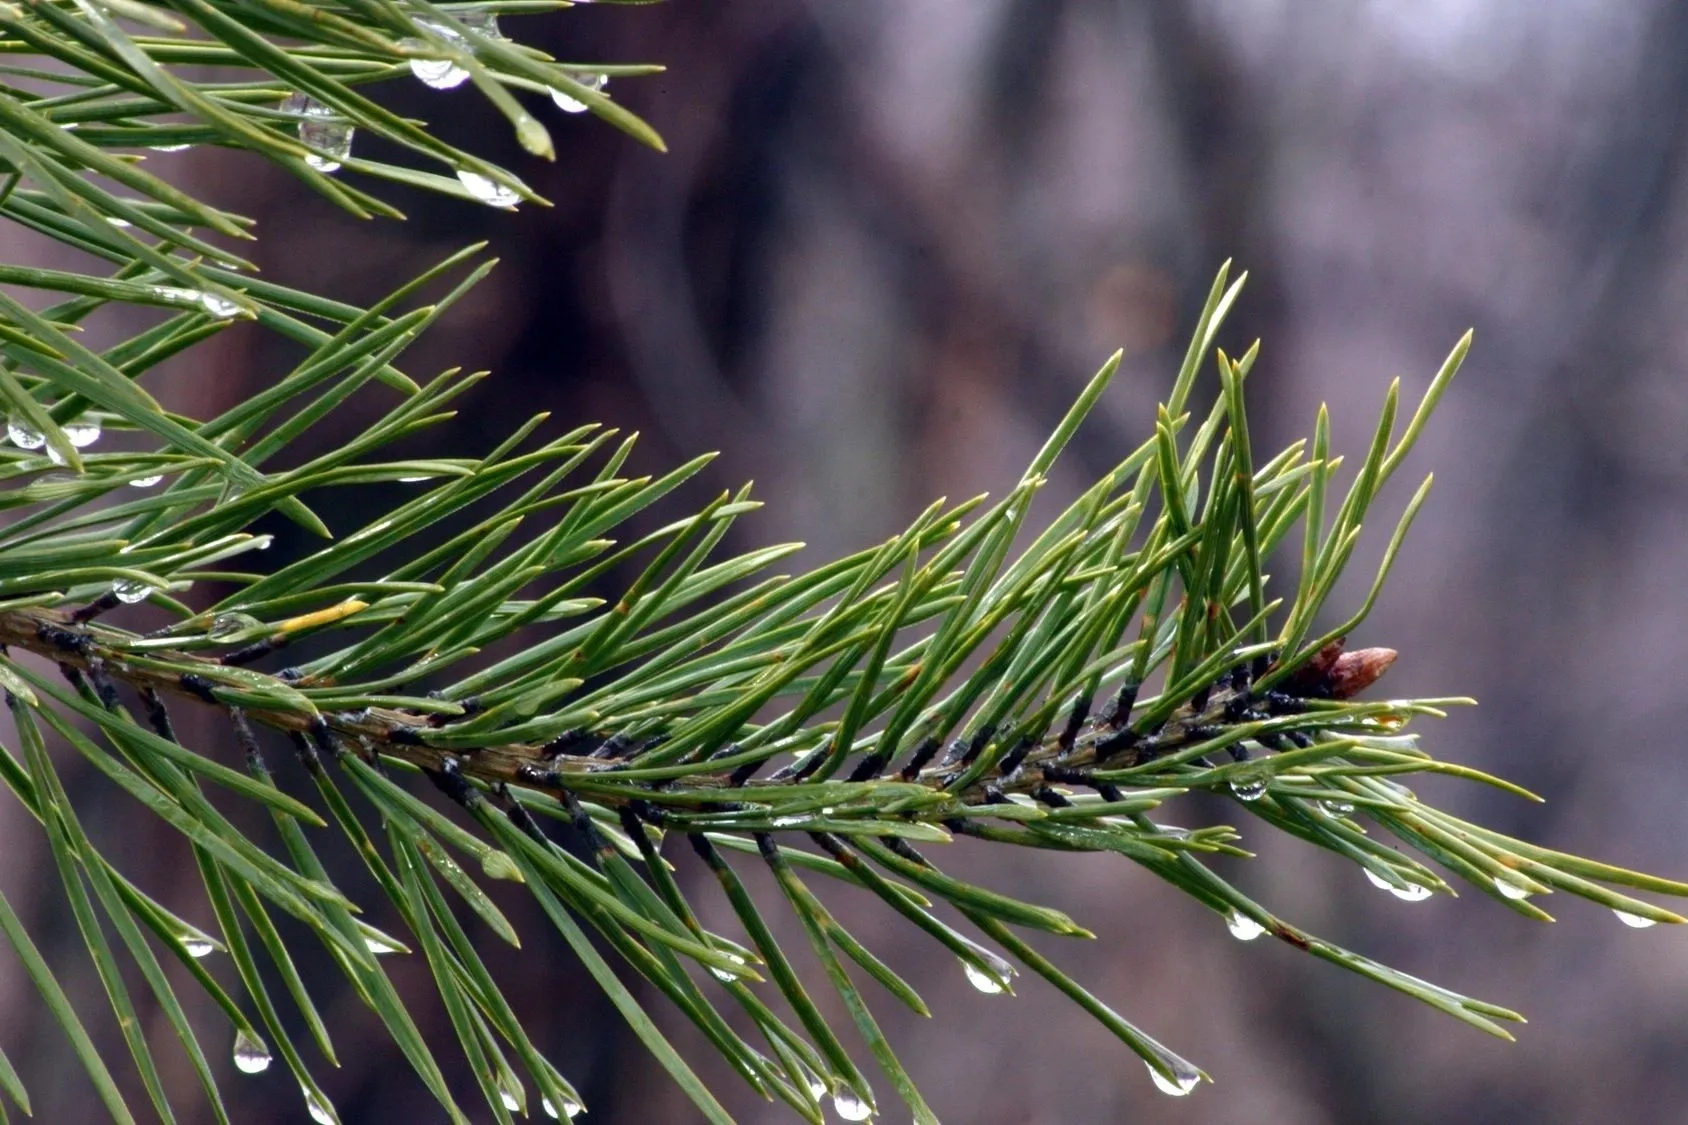 A close up of the needles on a pine tree